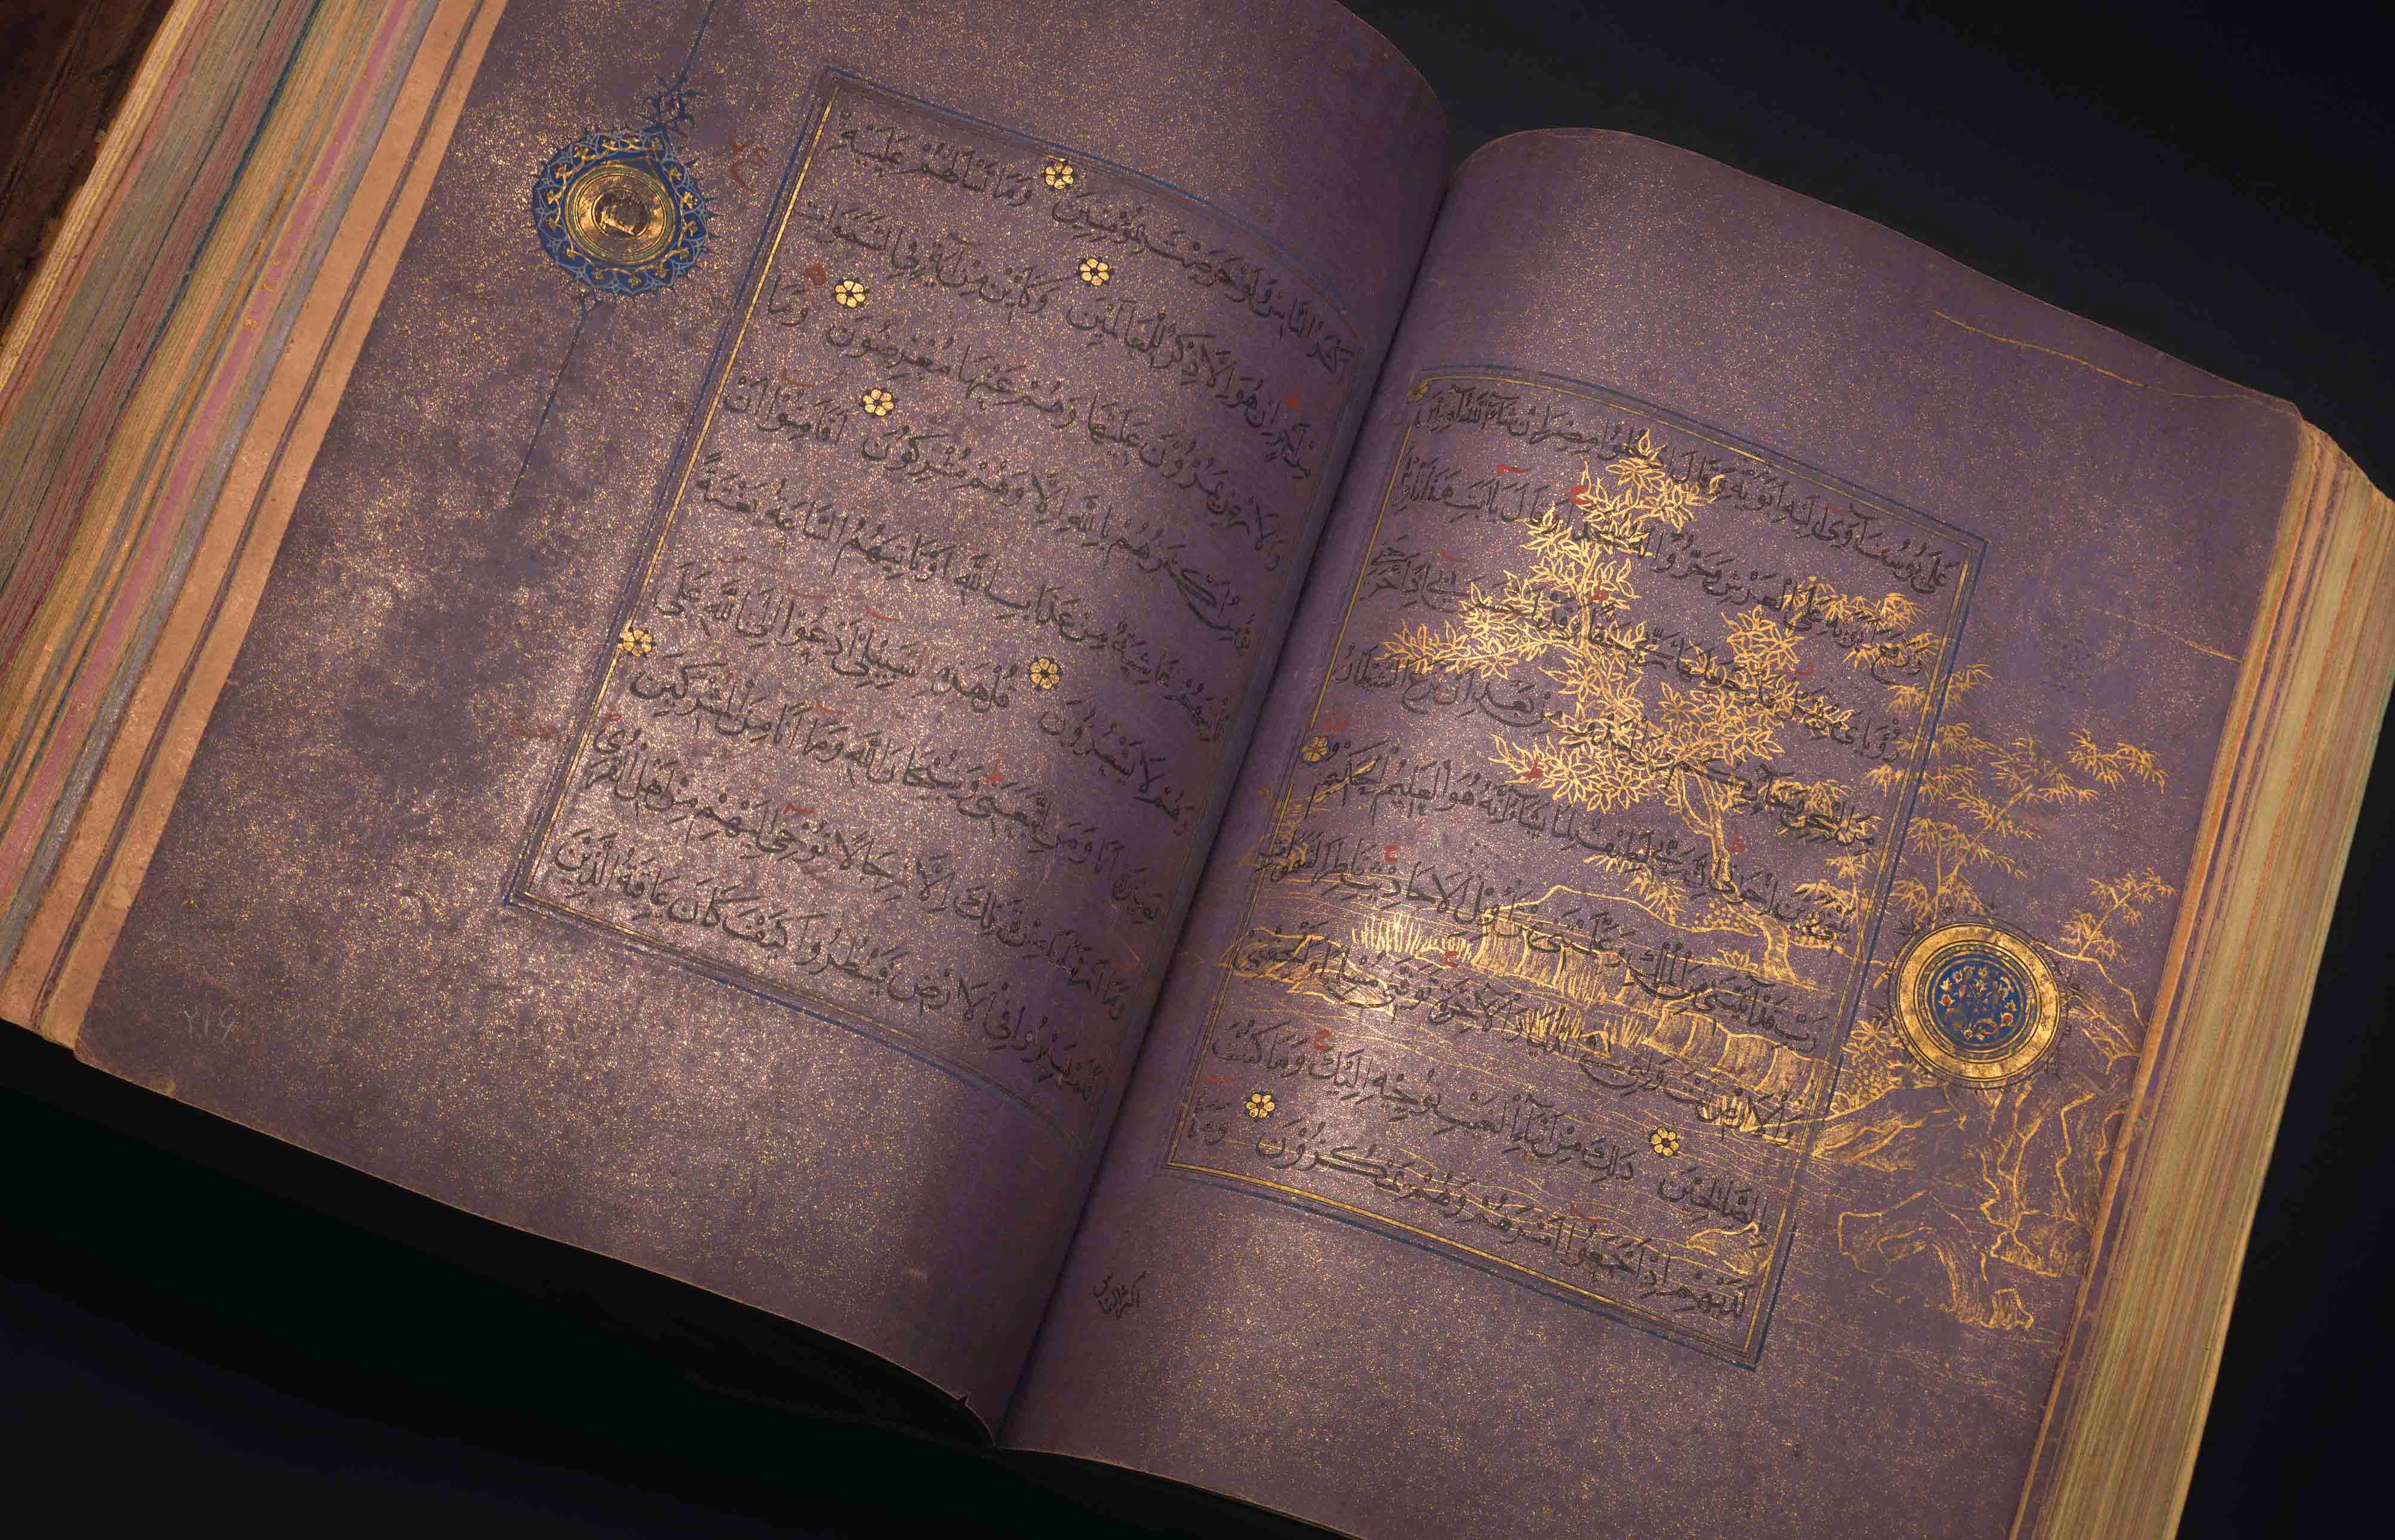 Quran quietly sells for record £7m despite questions over its provenance